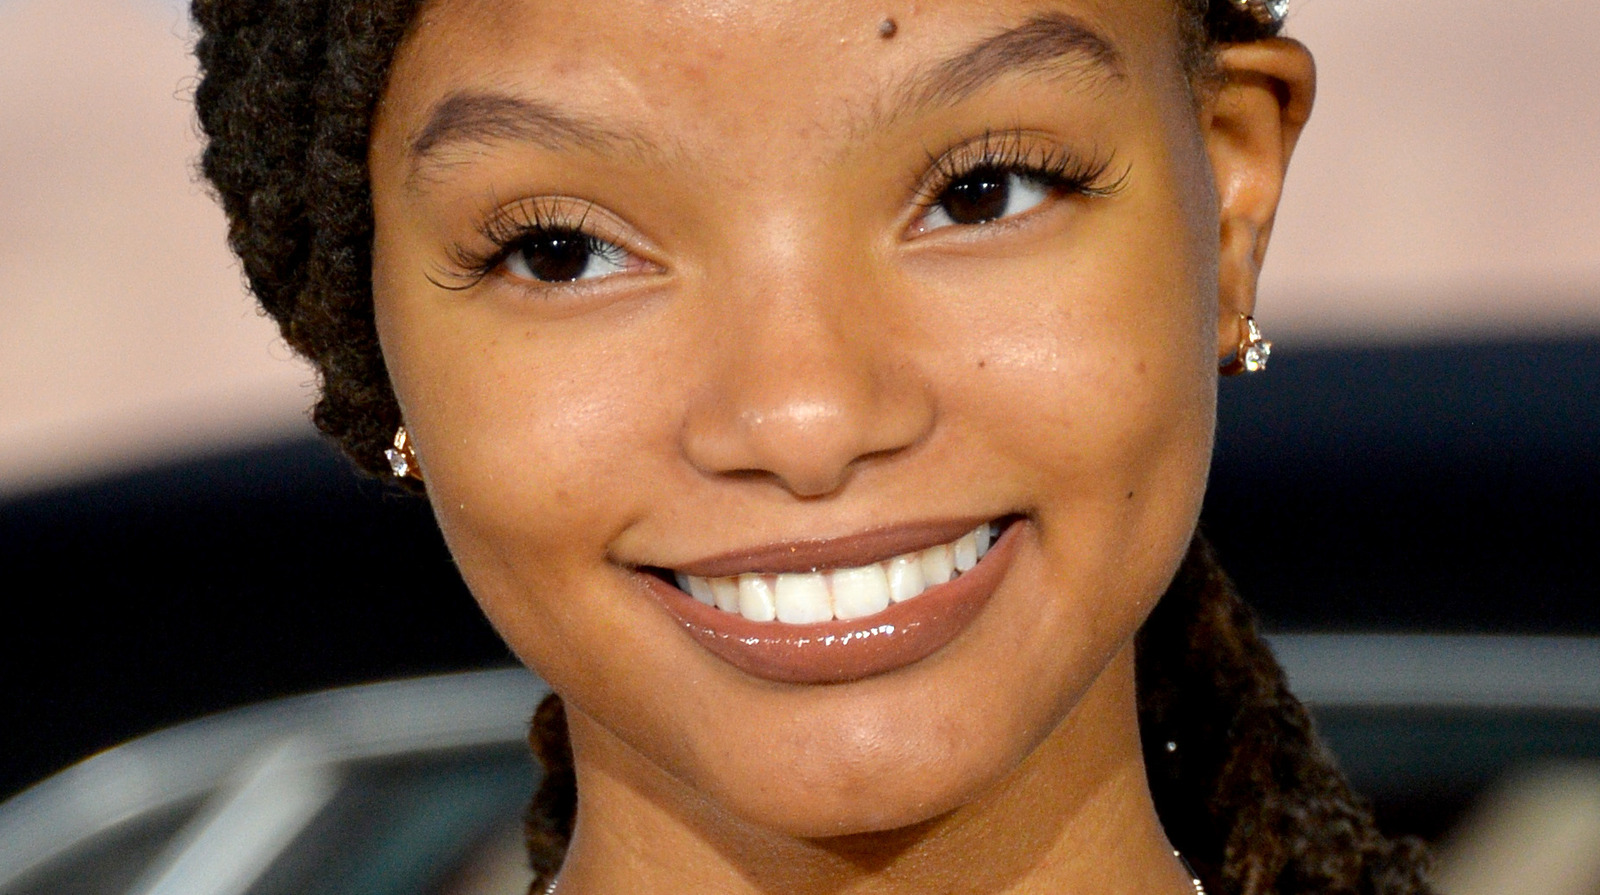 Halle Bailey Reacts To The Glowing Fan Response To Her Little Mermaid Teaser